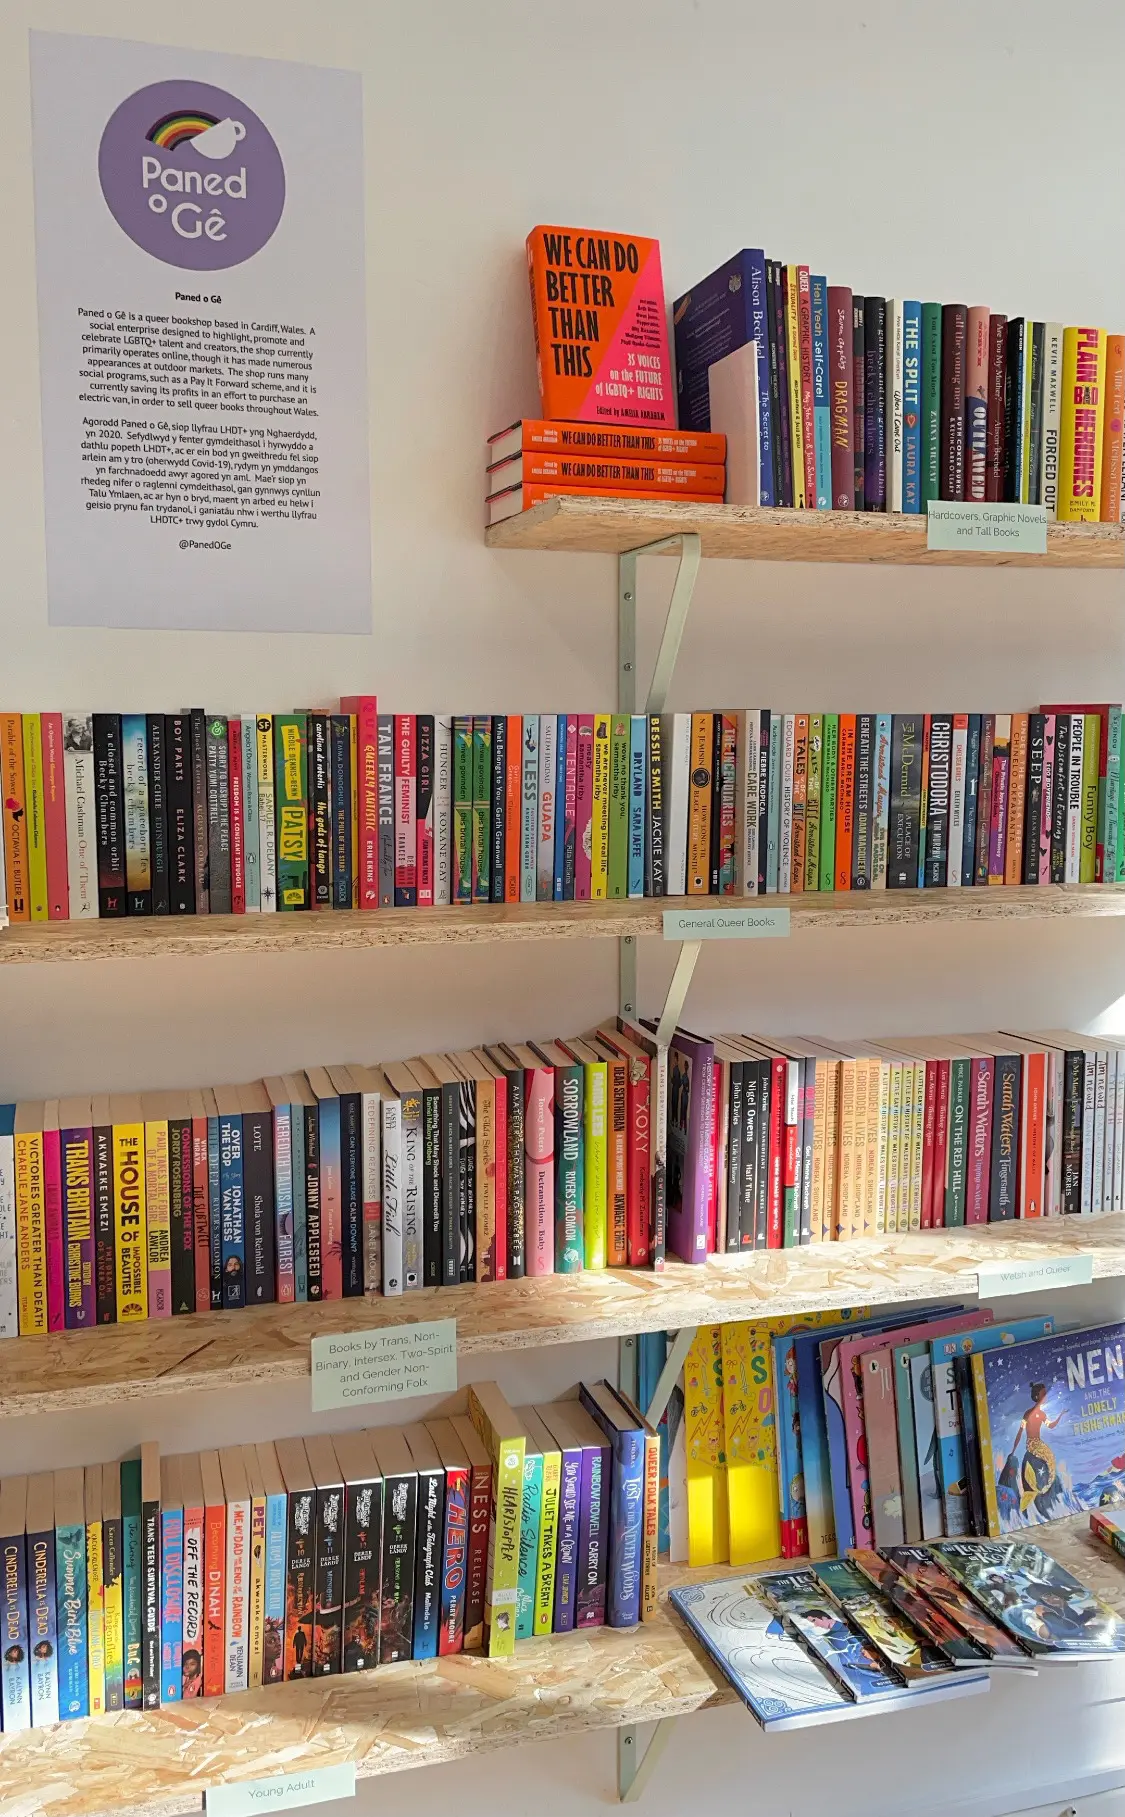 Photo of Paned o Gê's bookshelves at The Queer Emporium.